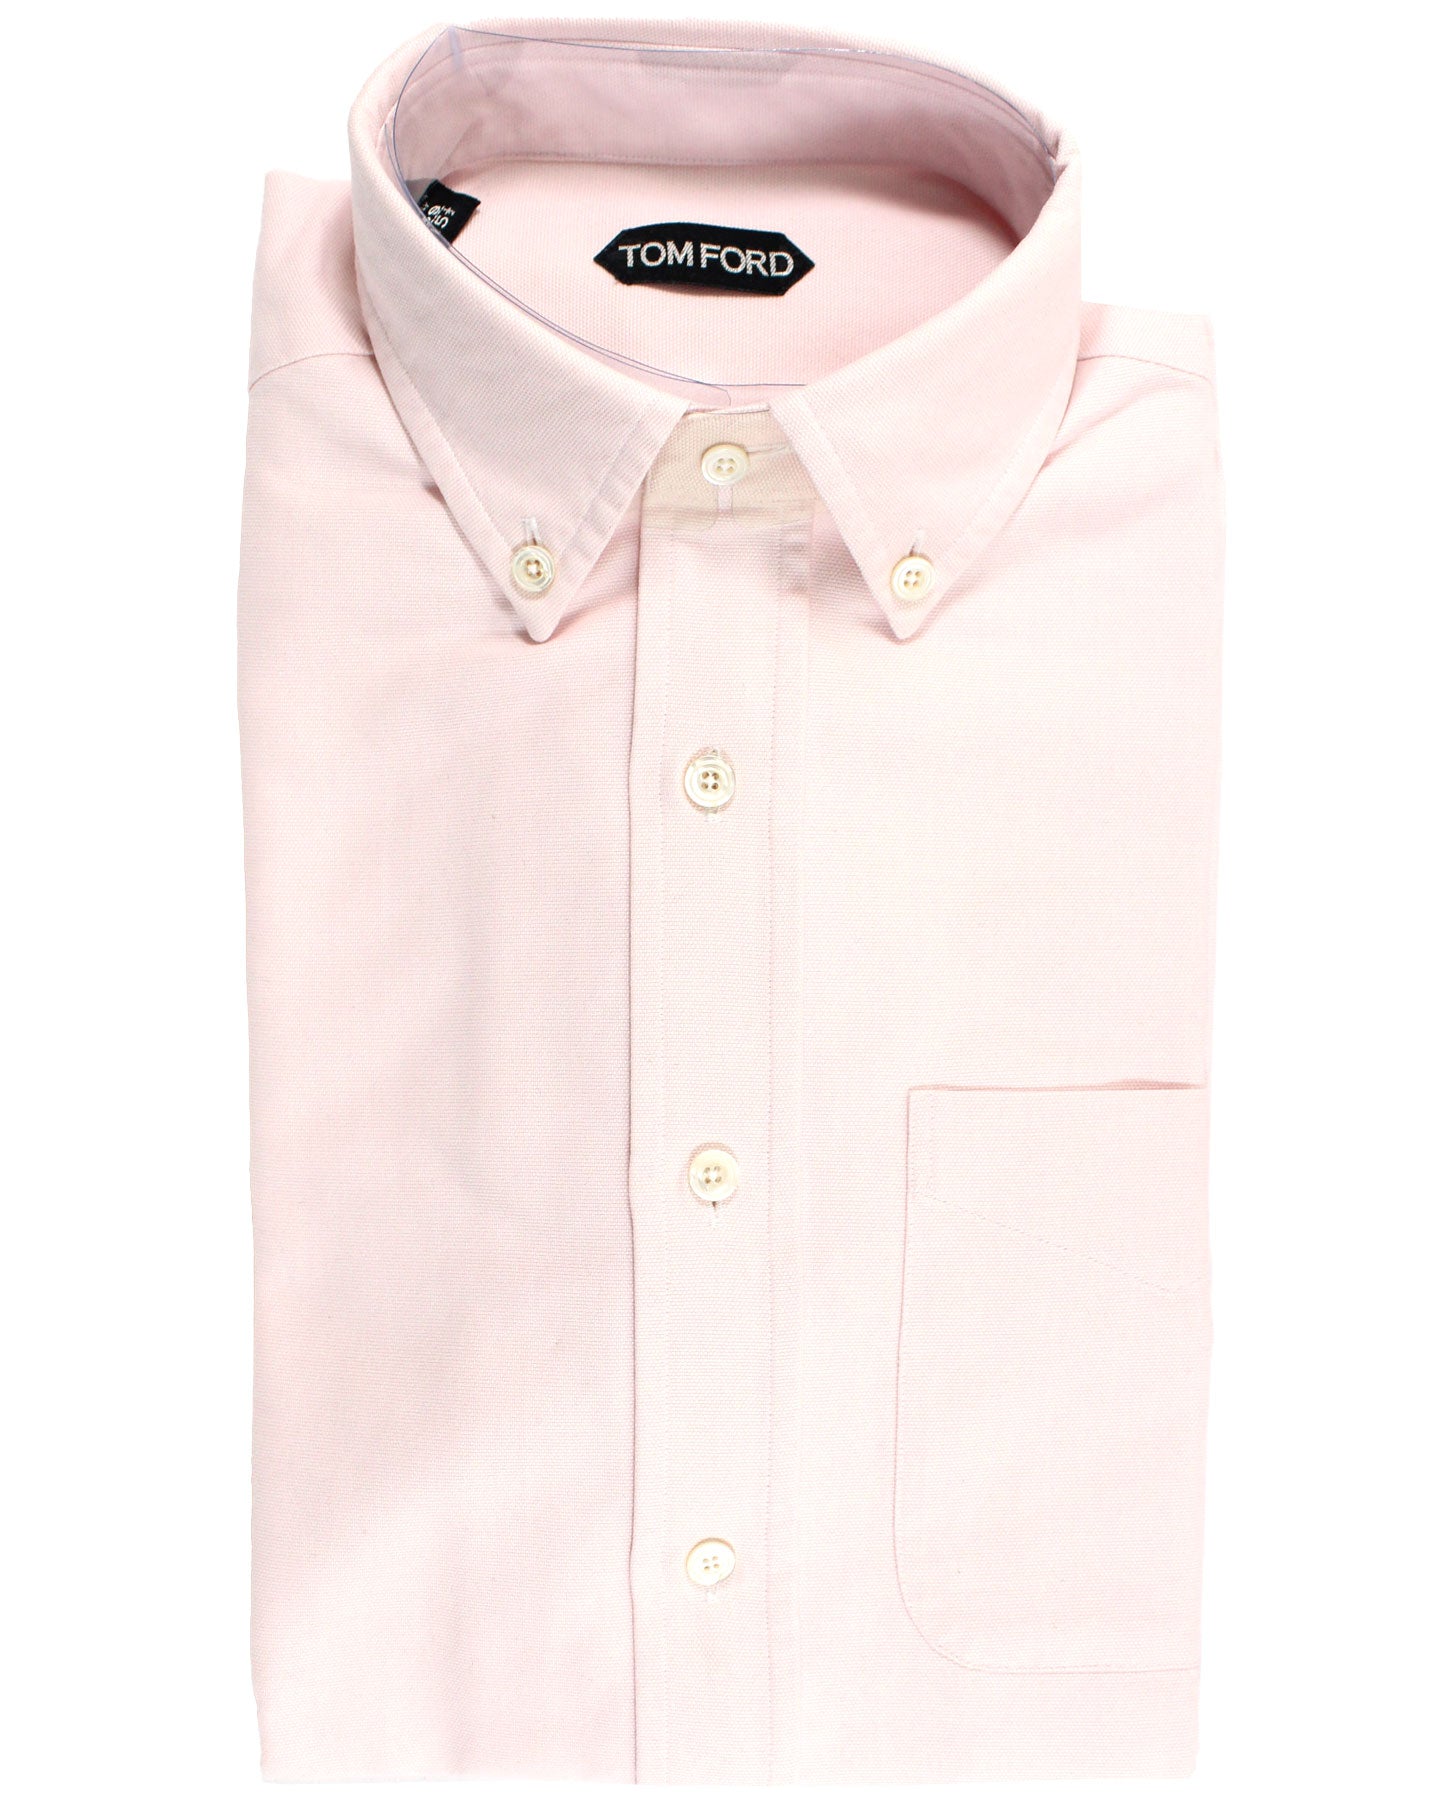 Tom Ford Button-Down Shirt Pink Solid Modern Fit 39 - 15 1/2